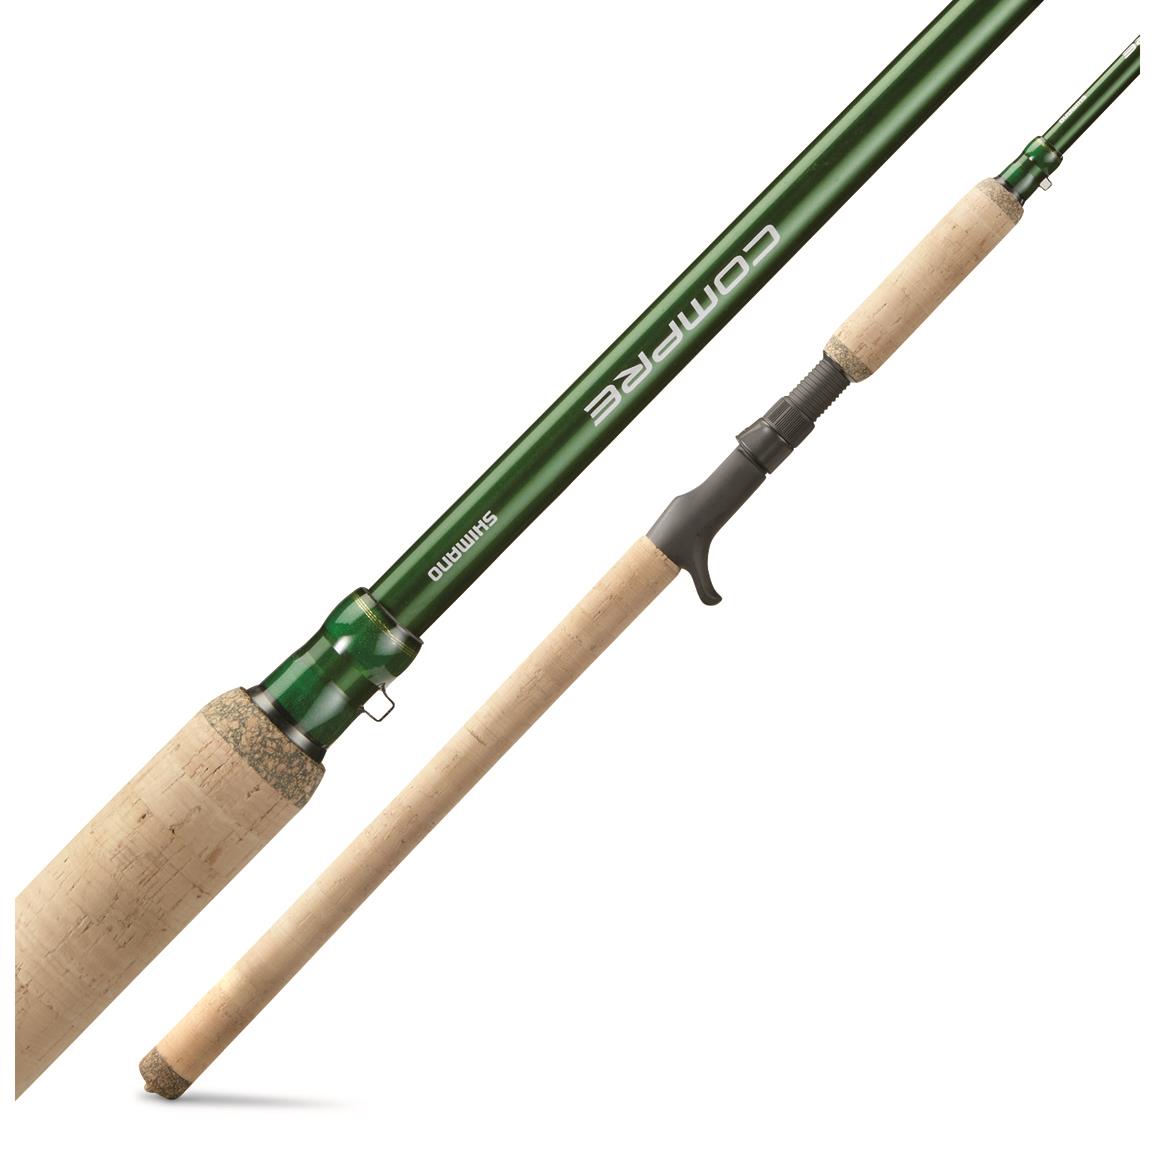 Shimano 6' 6" Casting Medium Heavy Action Fast Green Fishing Rod w/7 Guides 